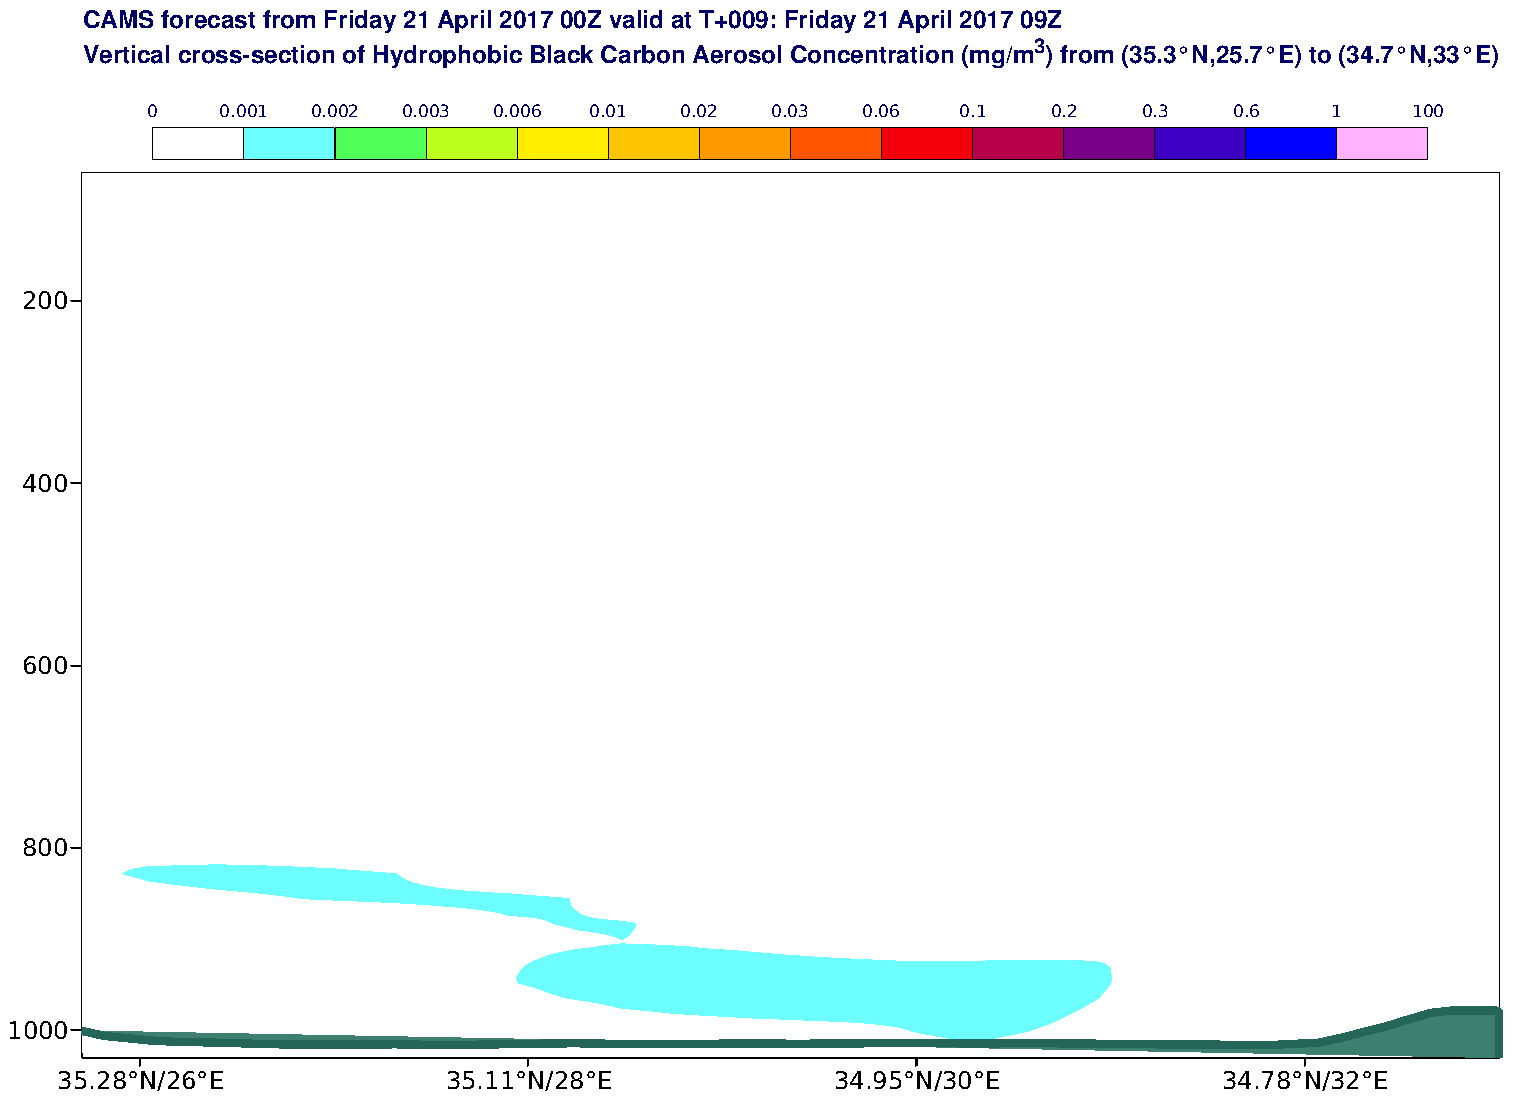 Vertical cross-section of Hydrophobic Black Carbon Aerosol Concentration (mg/m3) valid at T9 - 2017-04-21 09:00